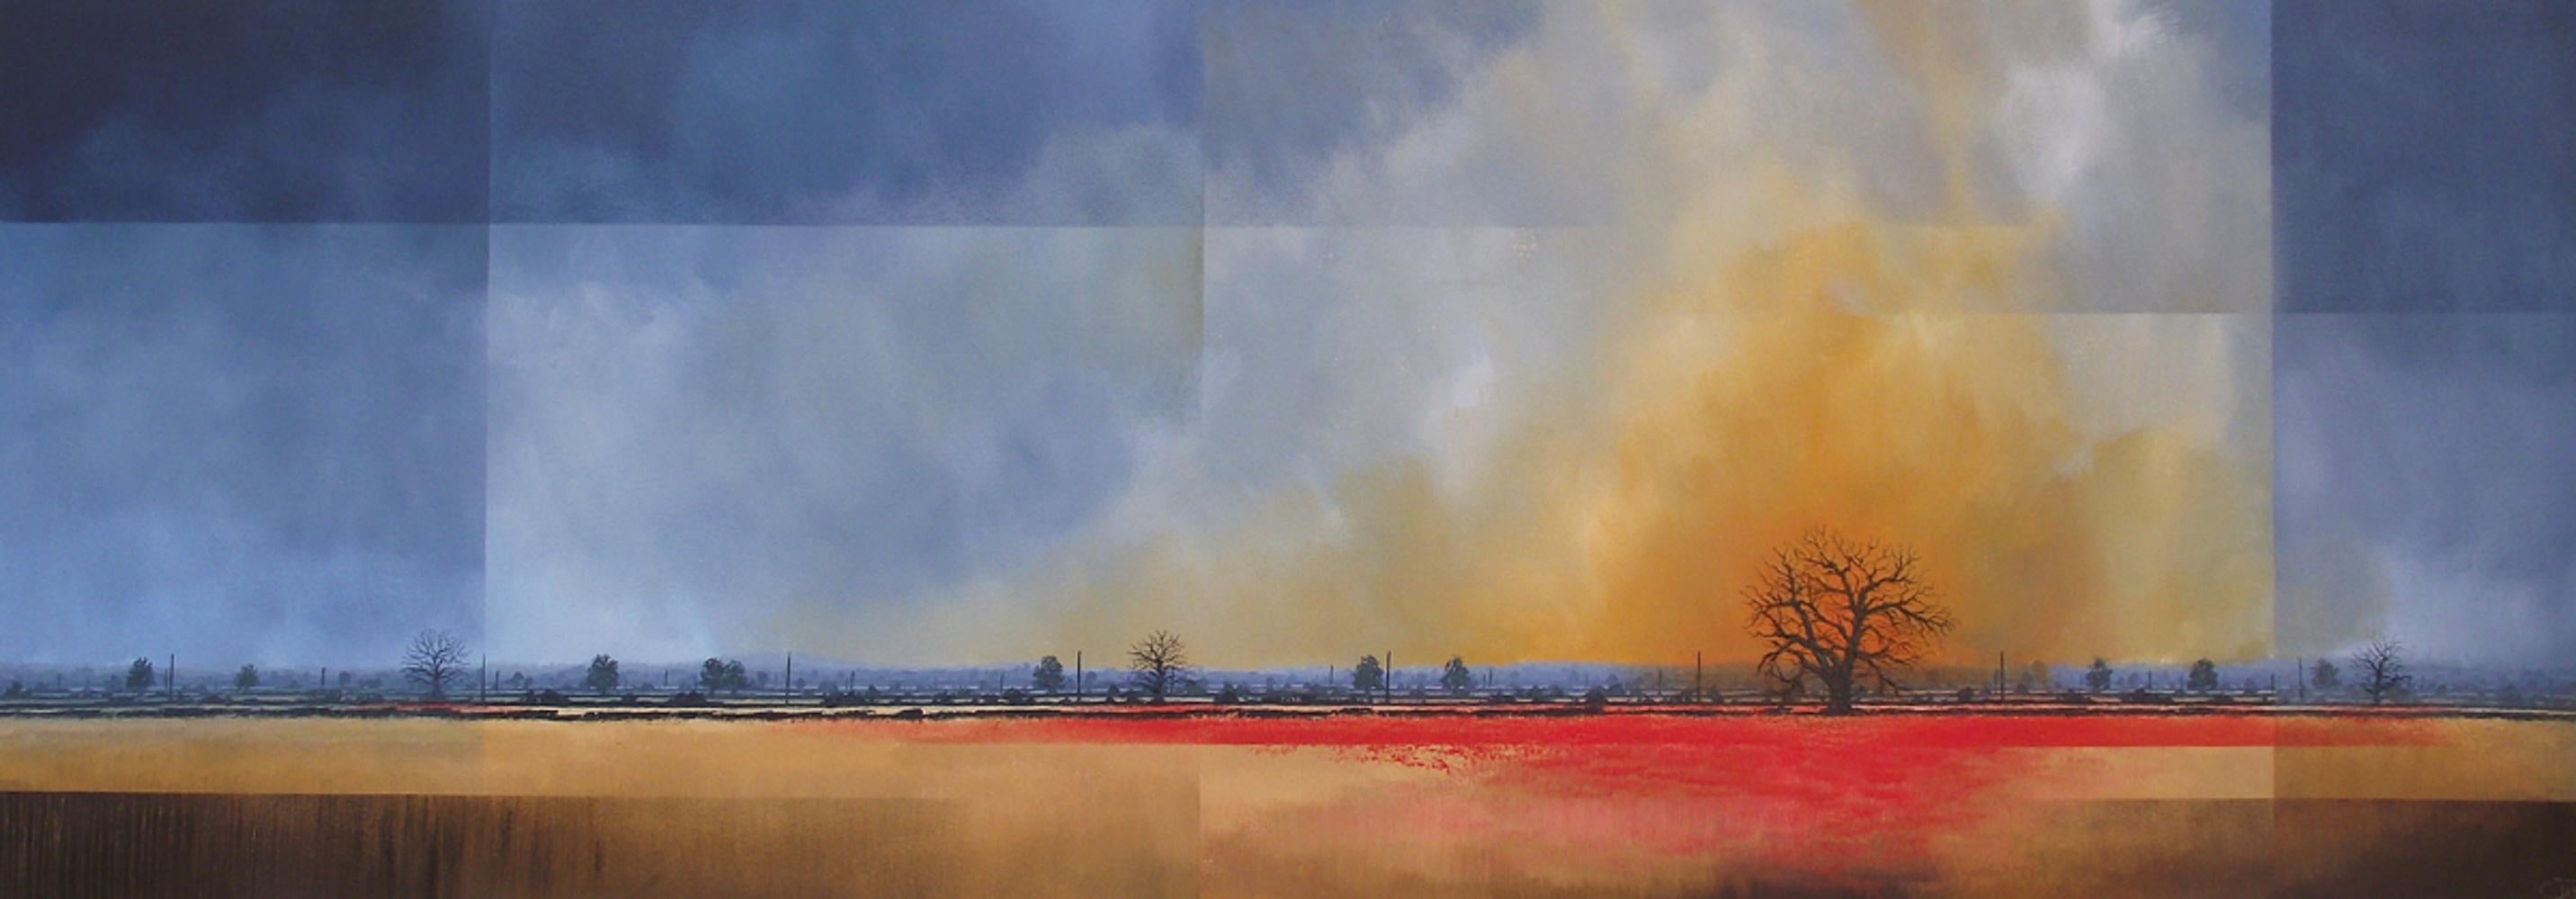 Fenland Heatwave - Contemporary British Landscape: Oil on Canvas painting - Painting by Glynne James